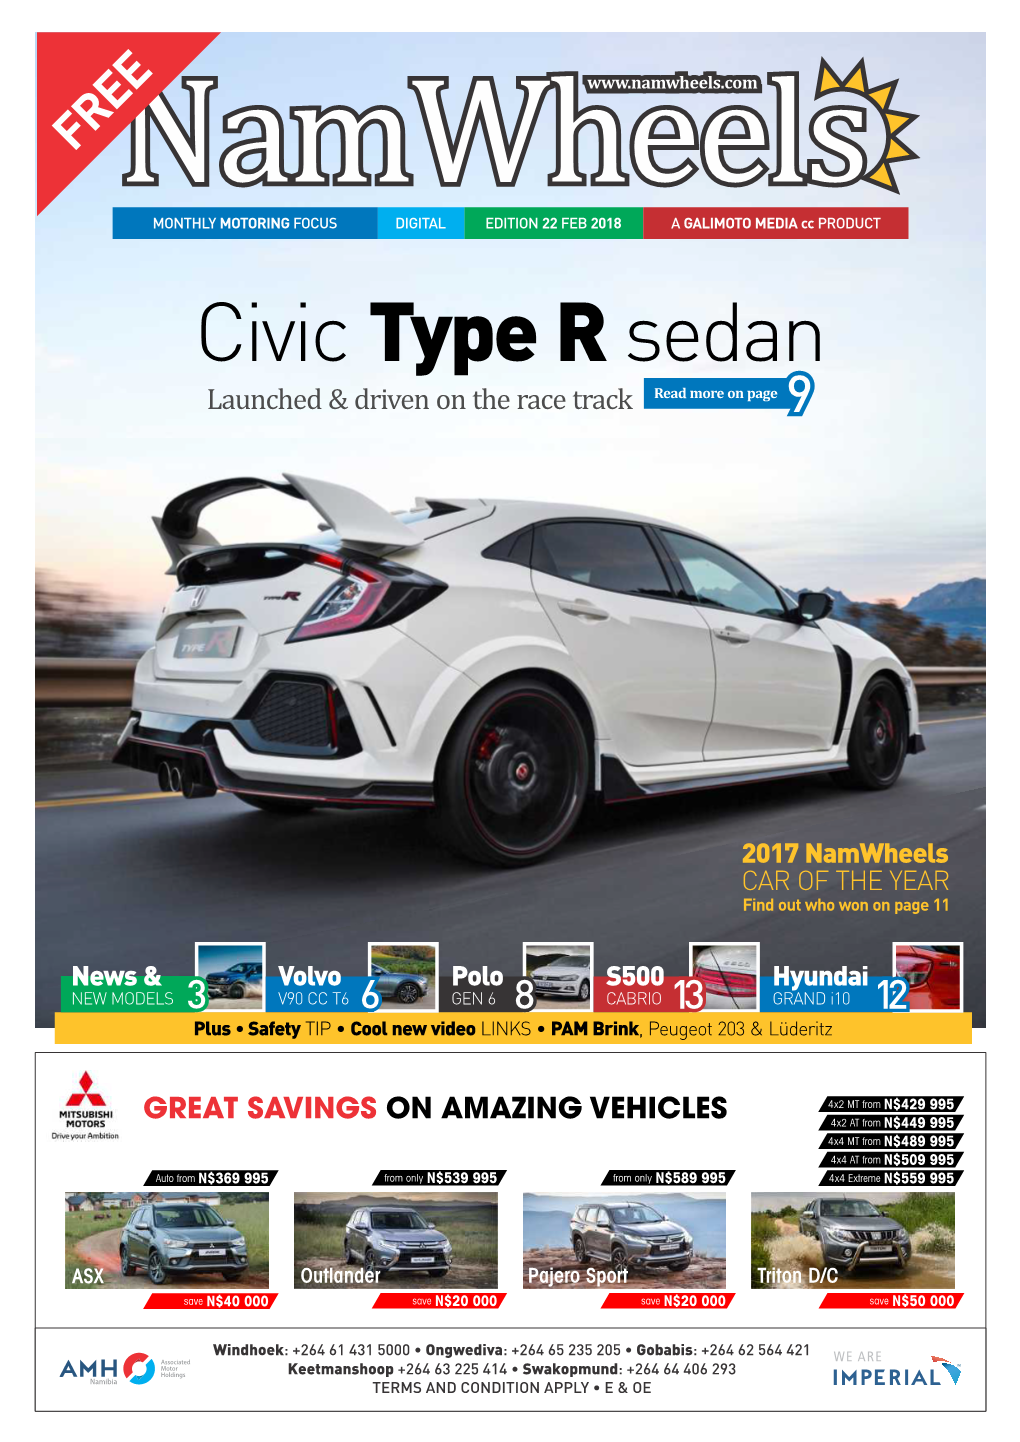 Civic Type R Sedan Launched & Driven on the Race Track Read More on Page 9